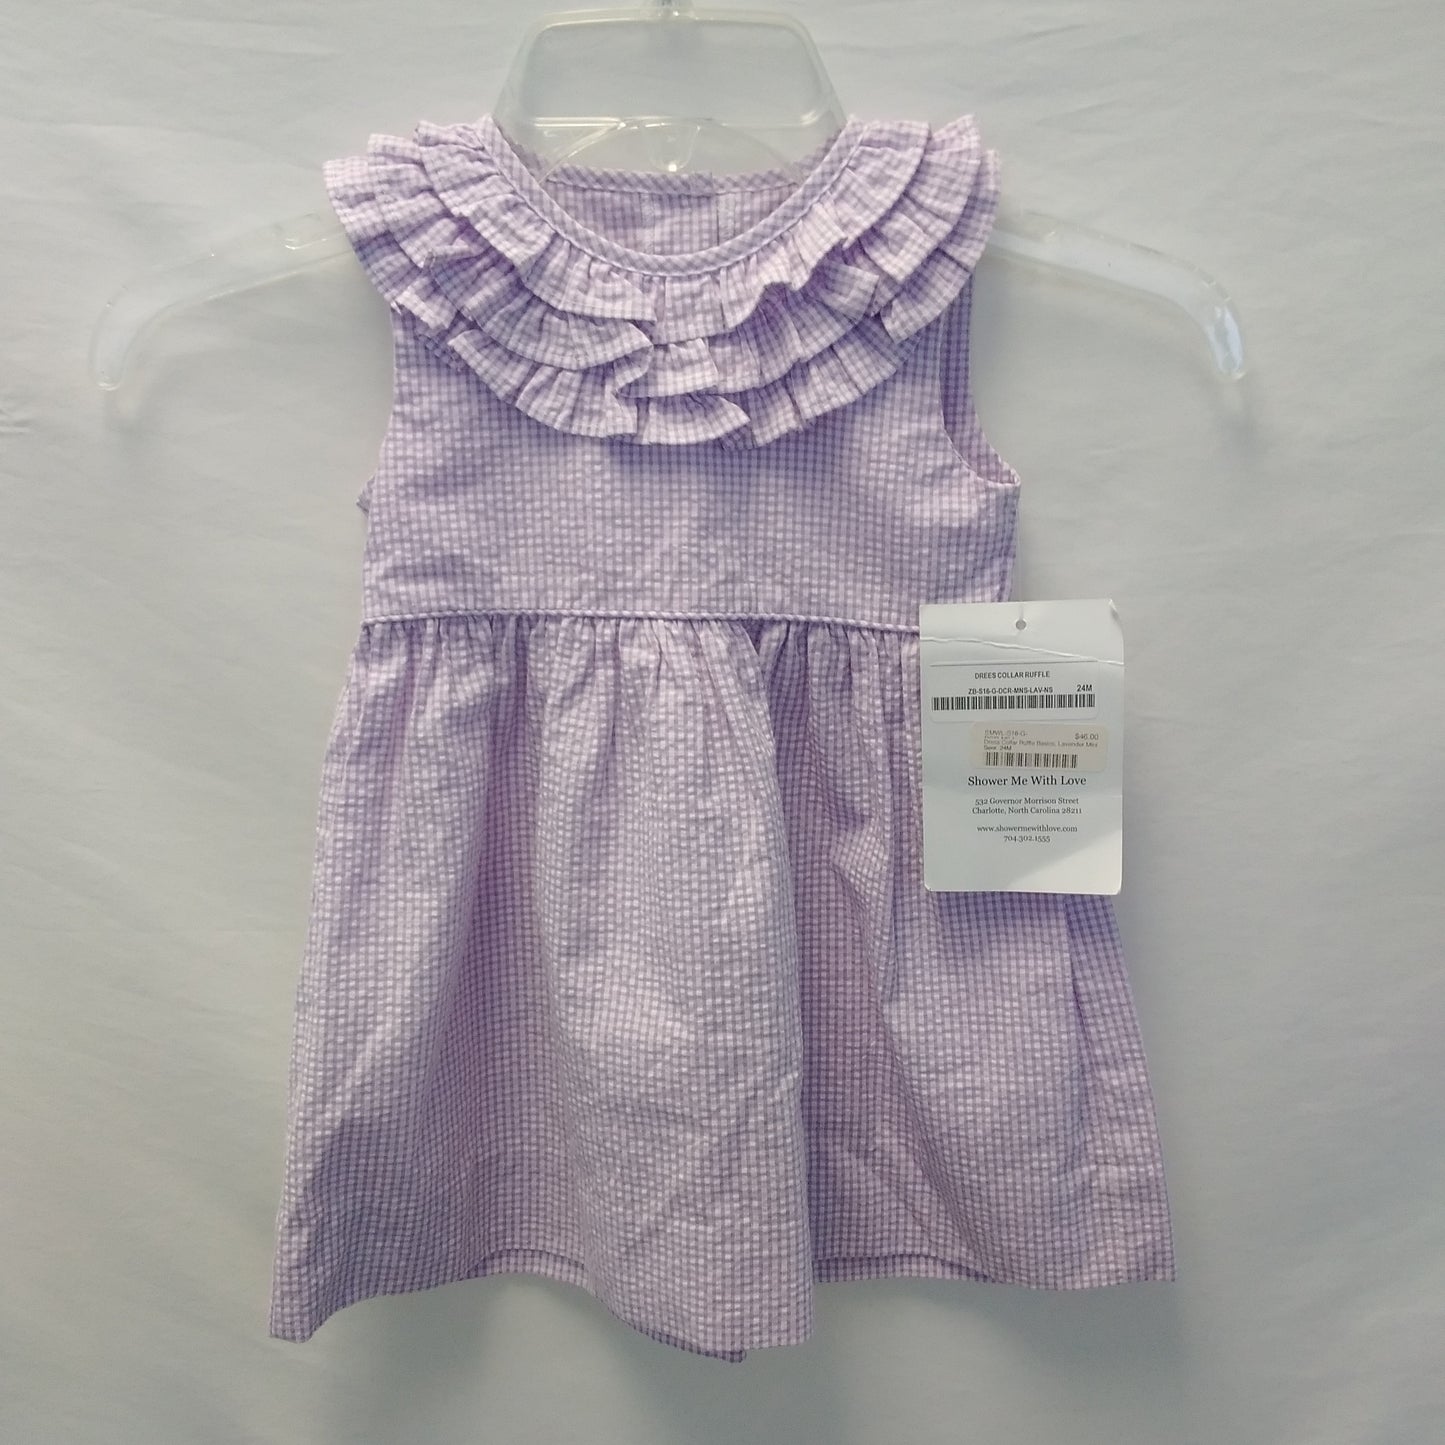 NWT - Shower me with Love Toddler Ruffle Collar Lavender Dress - Size: 24M